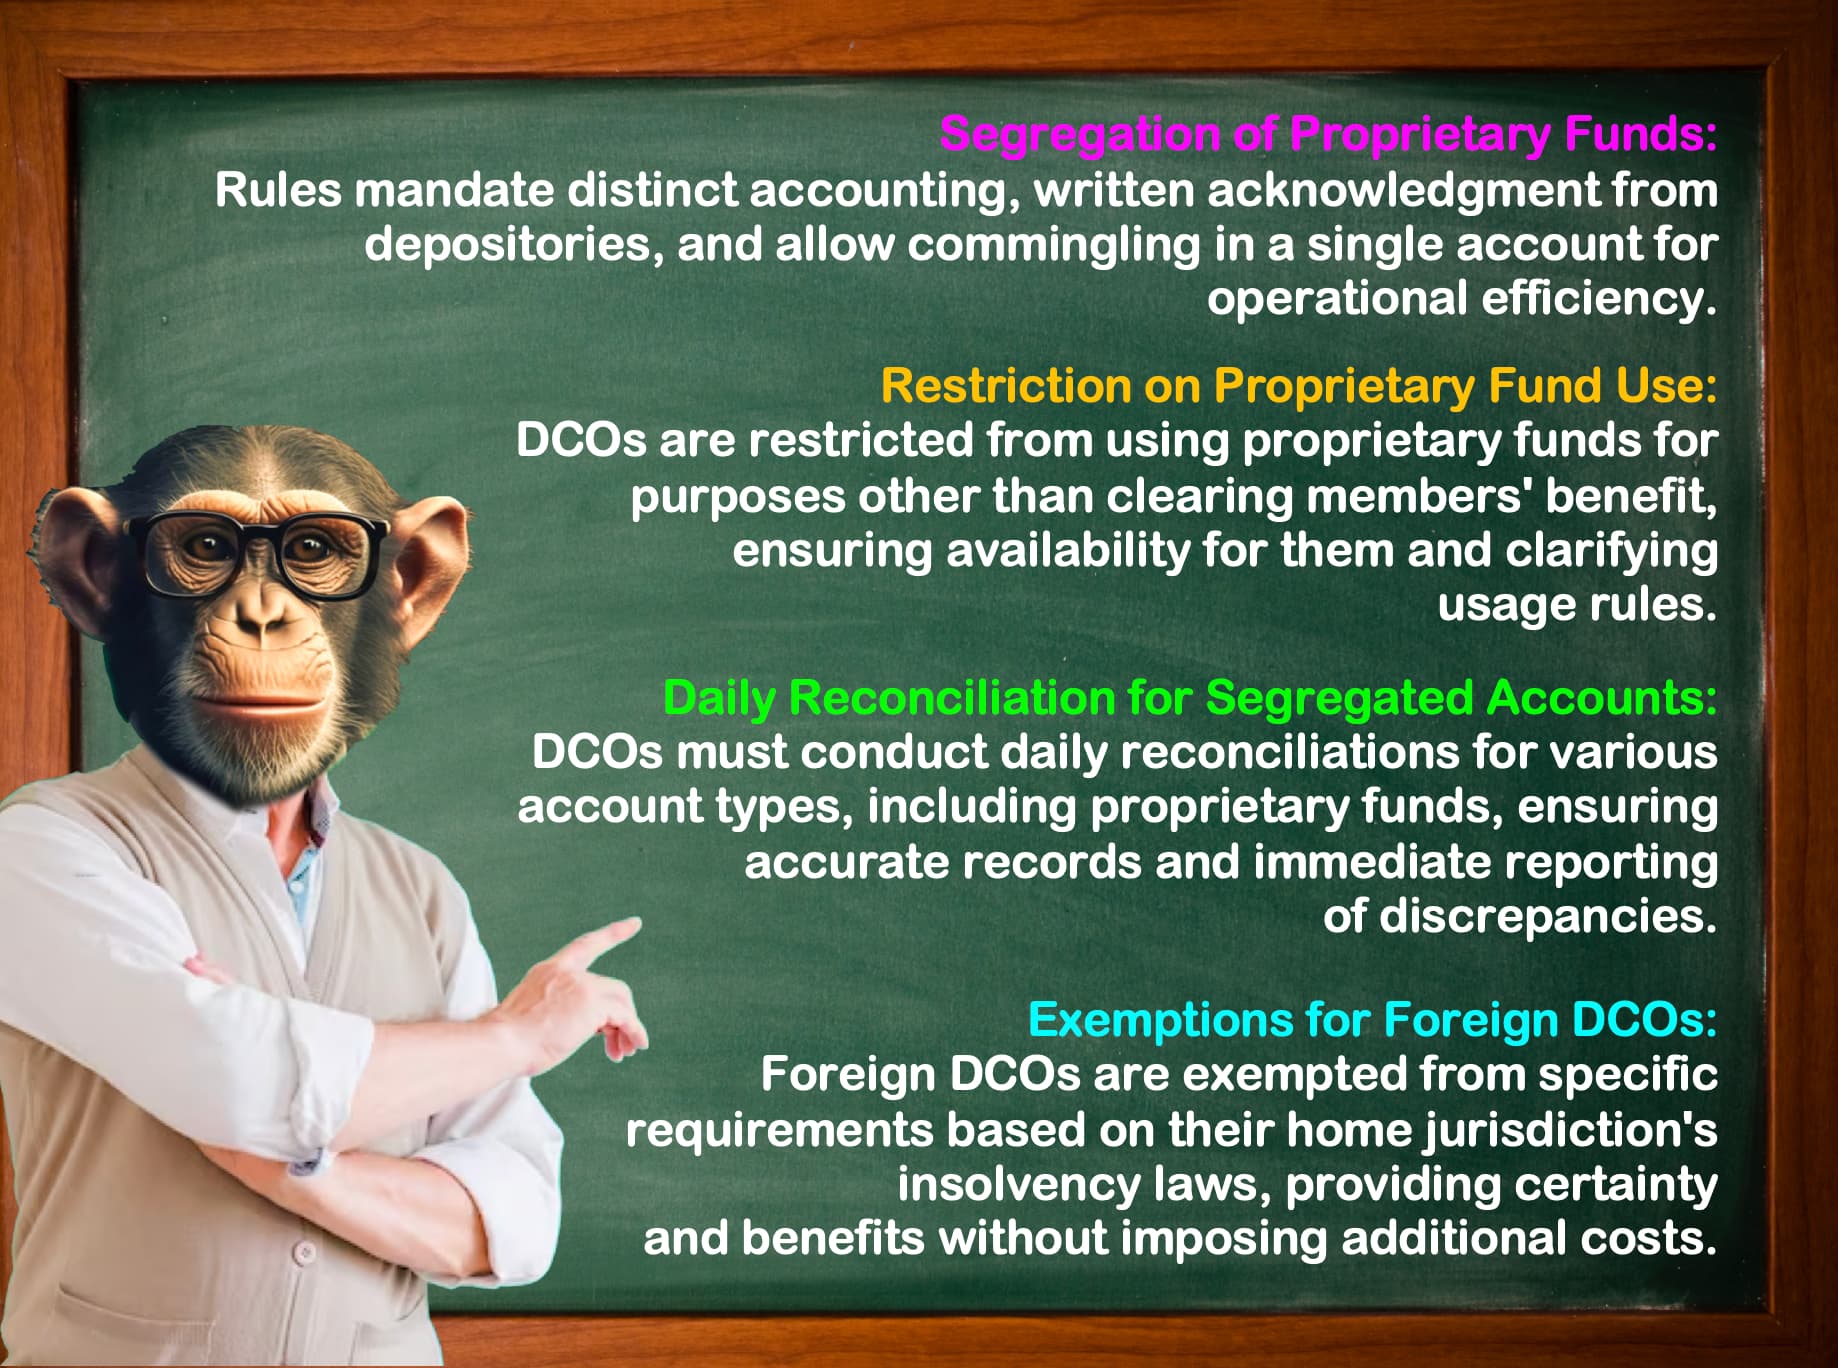 HEADER INCLUDES RESTRICTIONS OF PROPRIETARY FUNDS, DAILY RECONCILIATION FOR ACCOUNTS AND EXEMPTIONS FOR FOREIGN DCOS